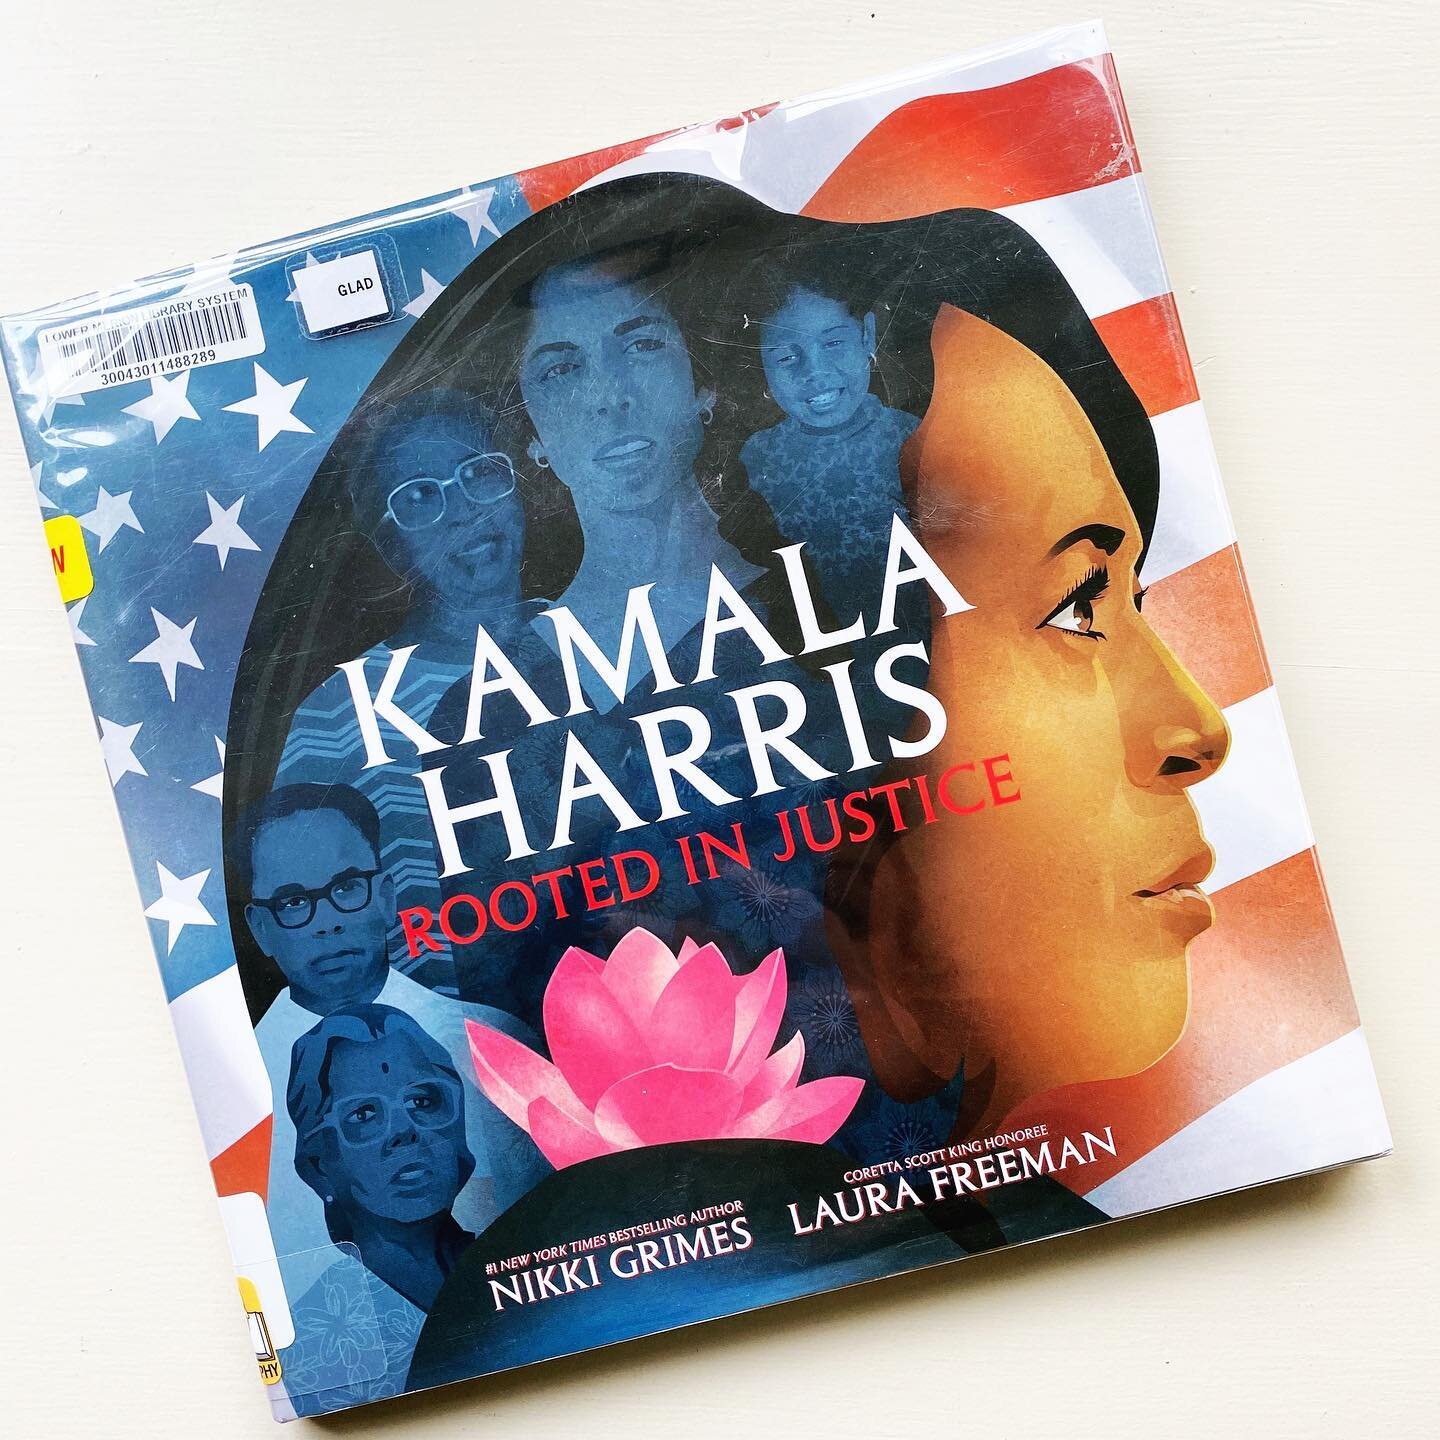 One of my favorite picture book biographies from 2020 is Kamala Harris: Rooted in Justice. Themes of family (both the ones born into and the ones chosen), determination, hope, and progress ring clear in this lyrical work by Nikki Grimes. My oldest so